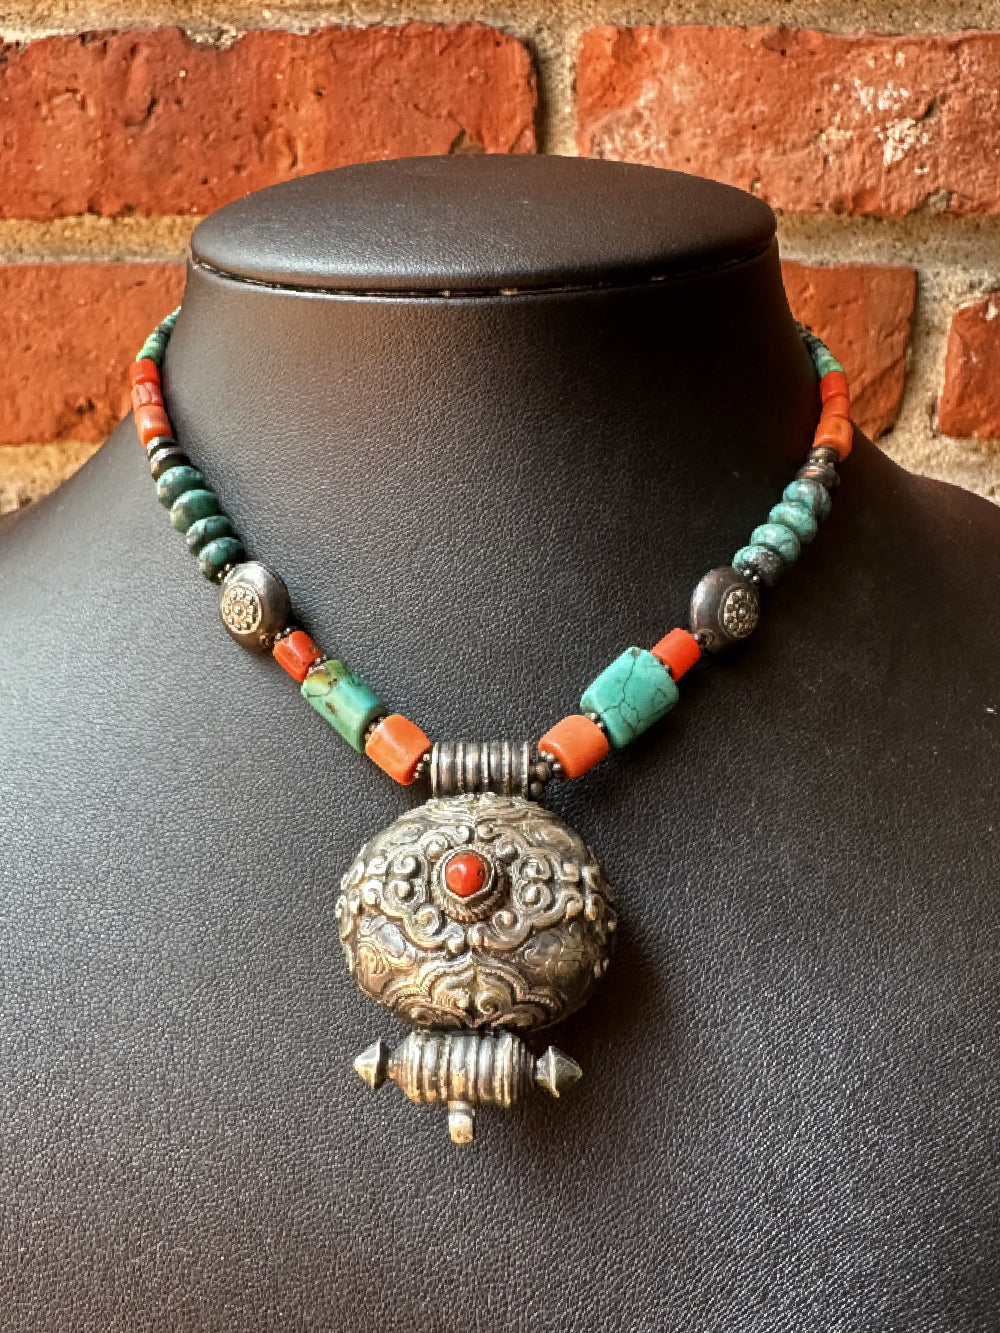 Tibetan old silver amulet necklace